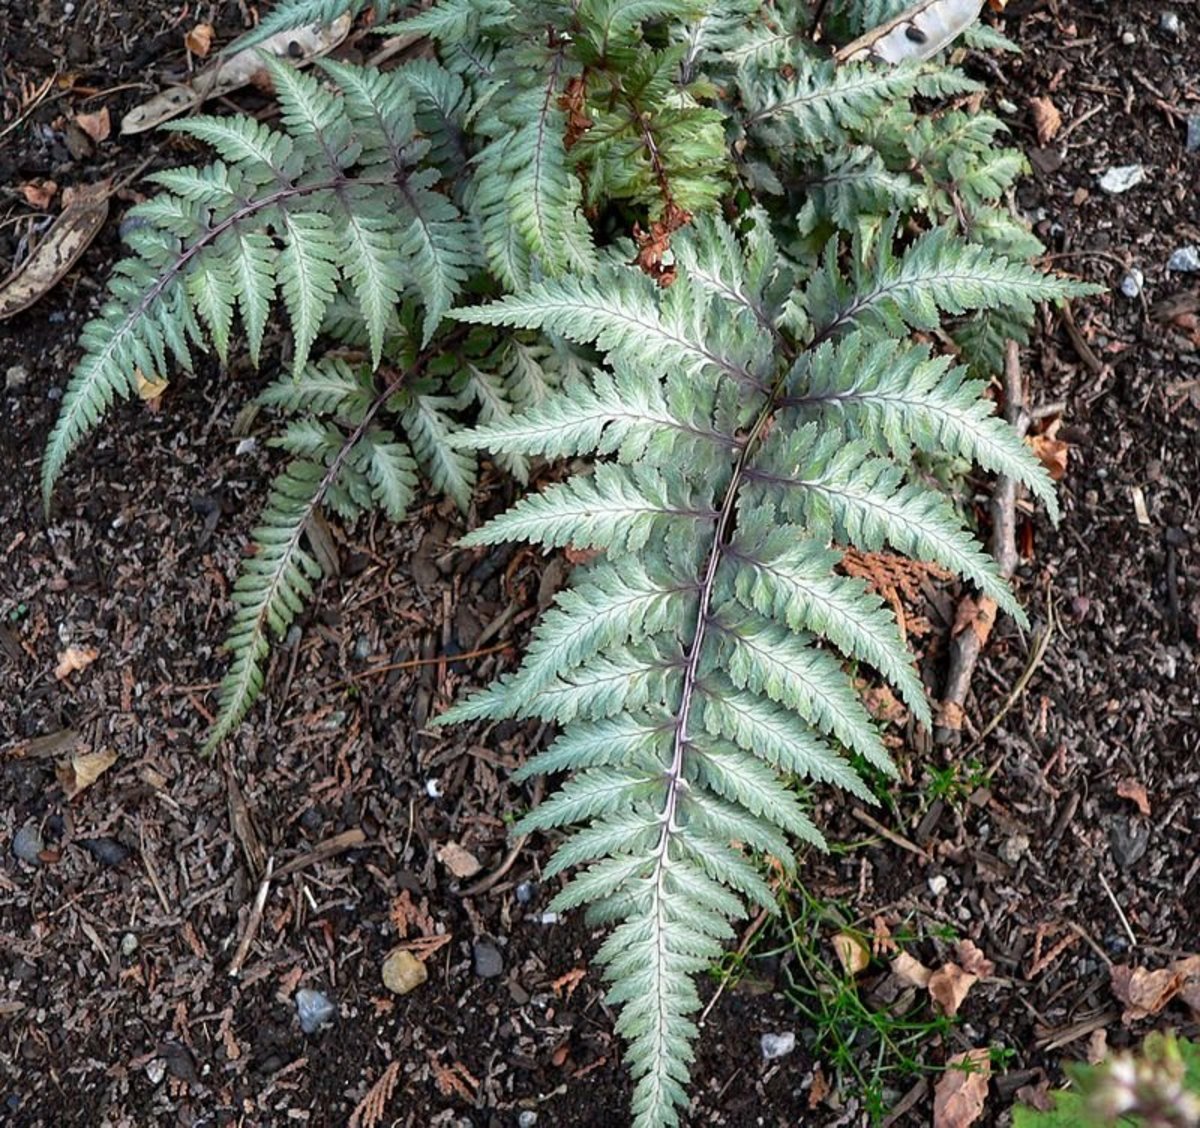 How to Grow Japanese Painted Fern, a Colorful Fern